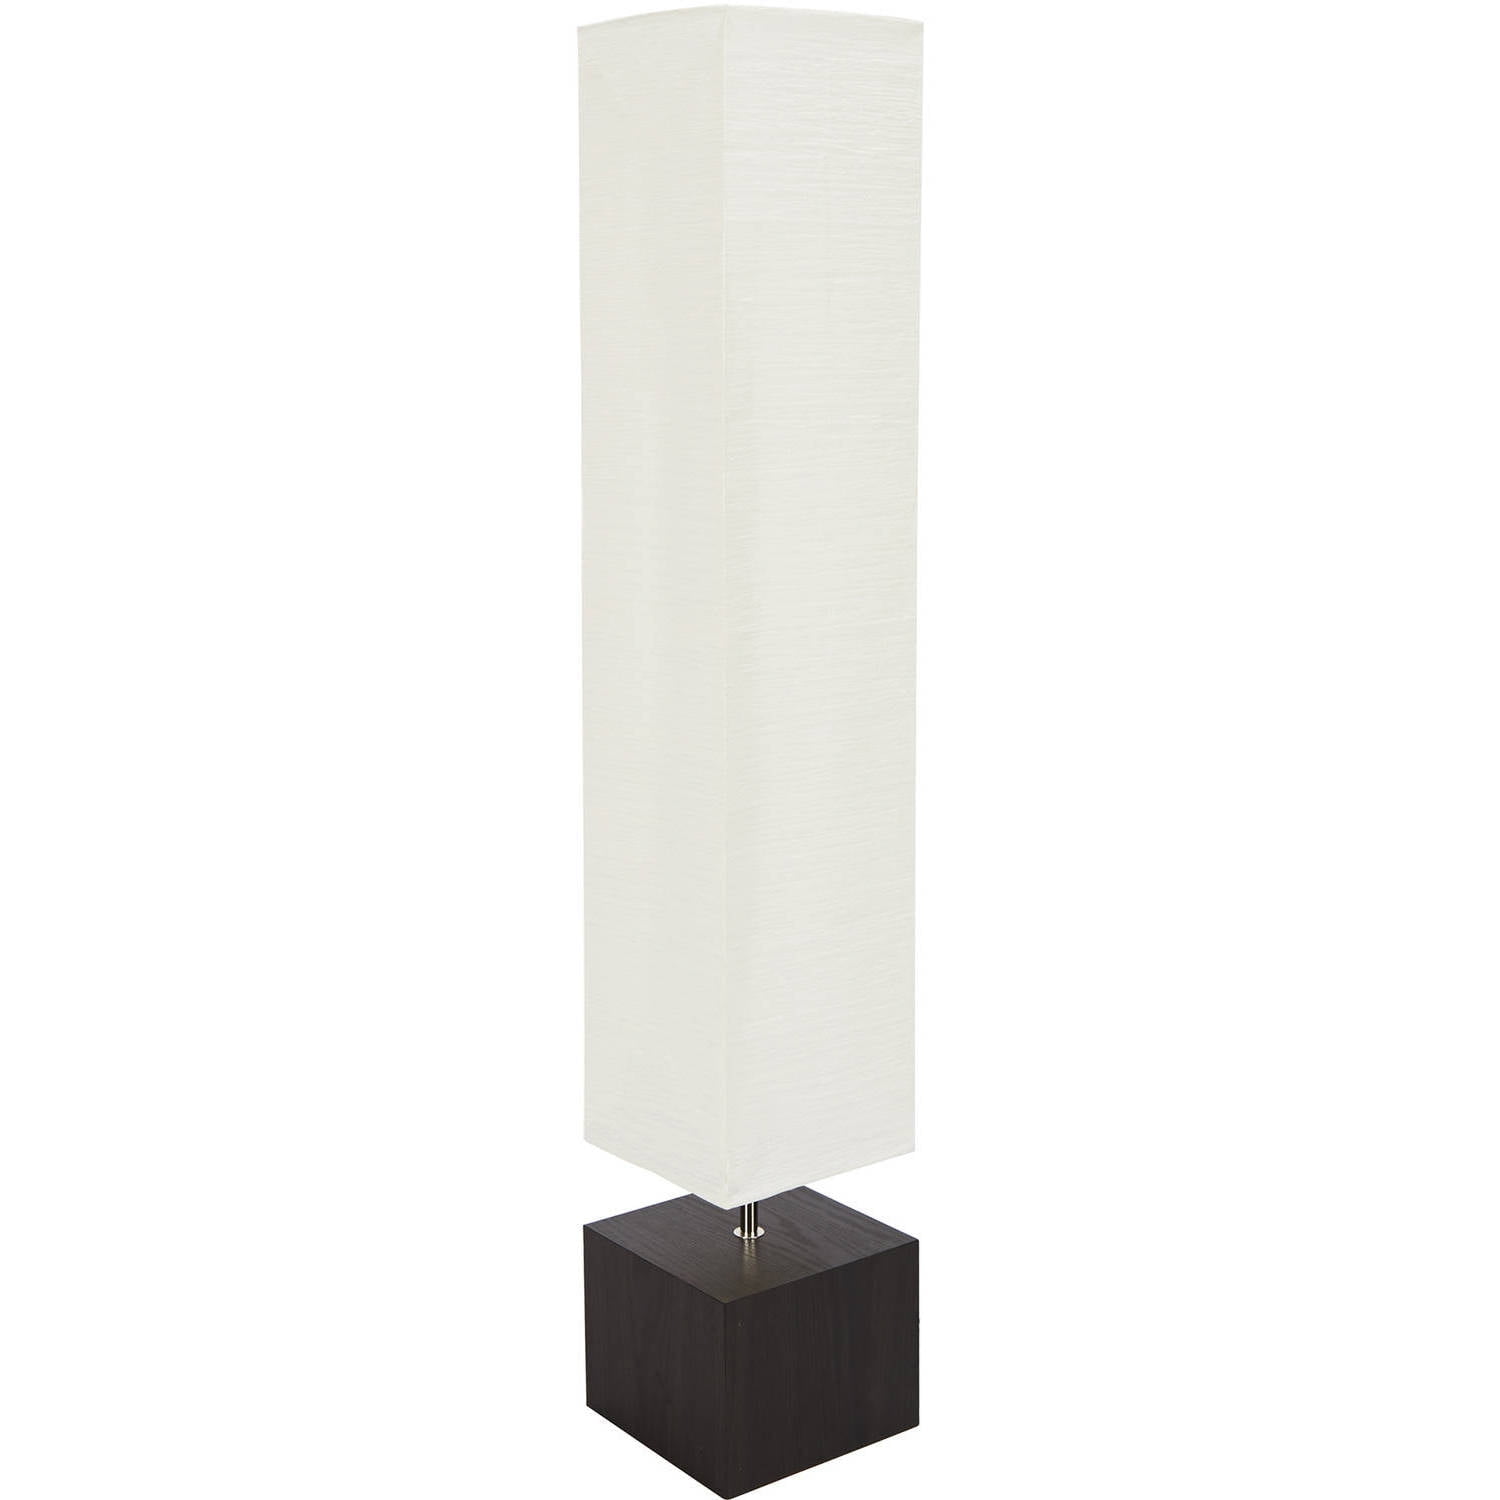 Mainstays White Rice Paper Floor Lamp With Dark Wood Base Walmart Com Walmart Com,Whats The Best Gin On The Market